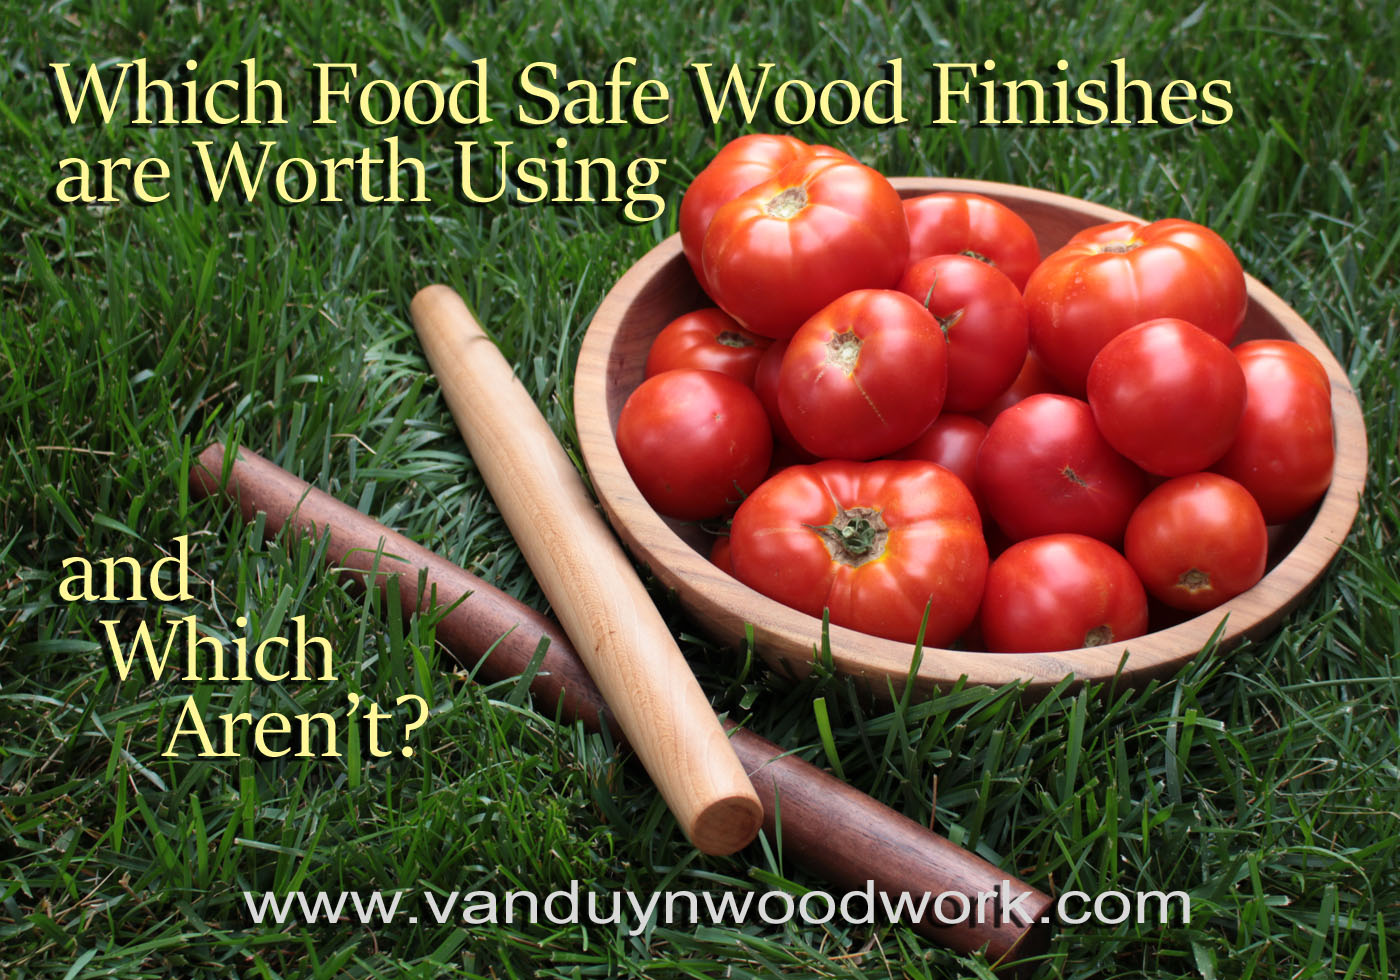 Which Food Safe Wood Finishes are Worth Using and Which Aren't